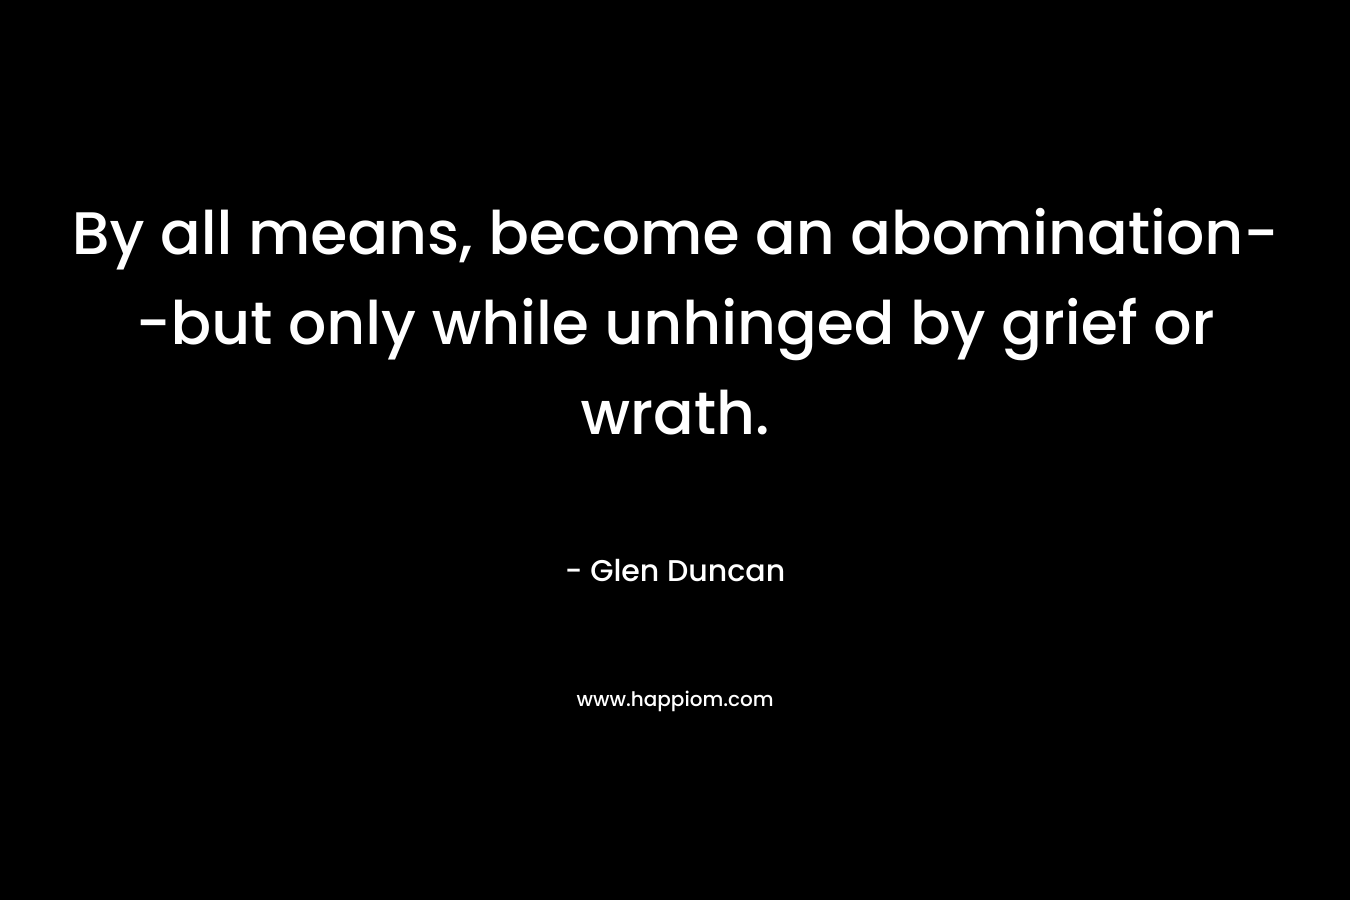 By all means, become an abomination--but only while unhinged by grief or wrath.